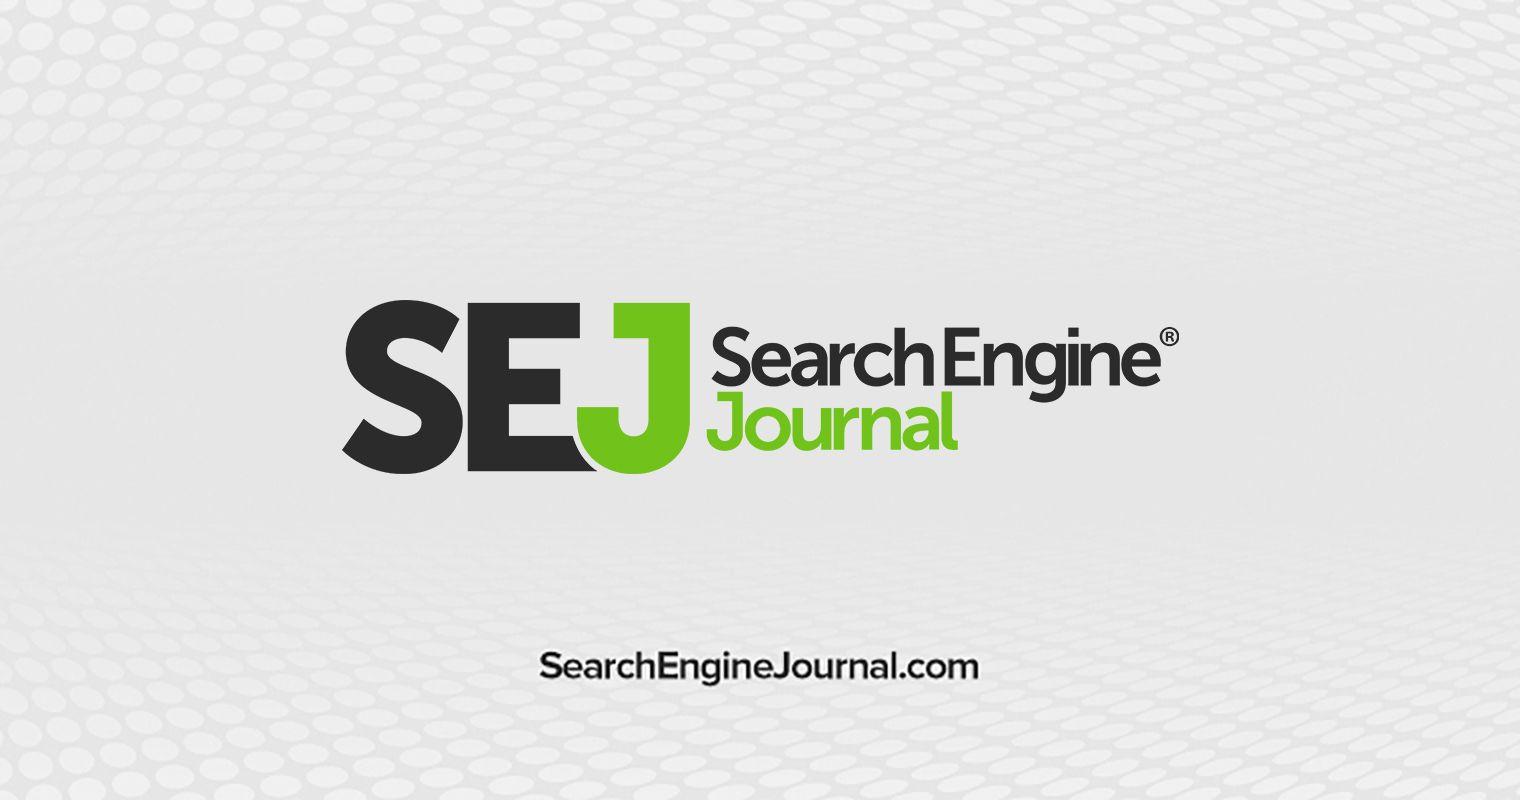 Search Engine Logo - Search Engine Journal - SEO, Search Marketing News and Tutorials